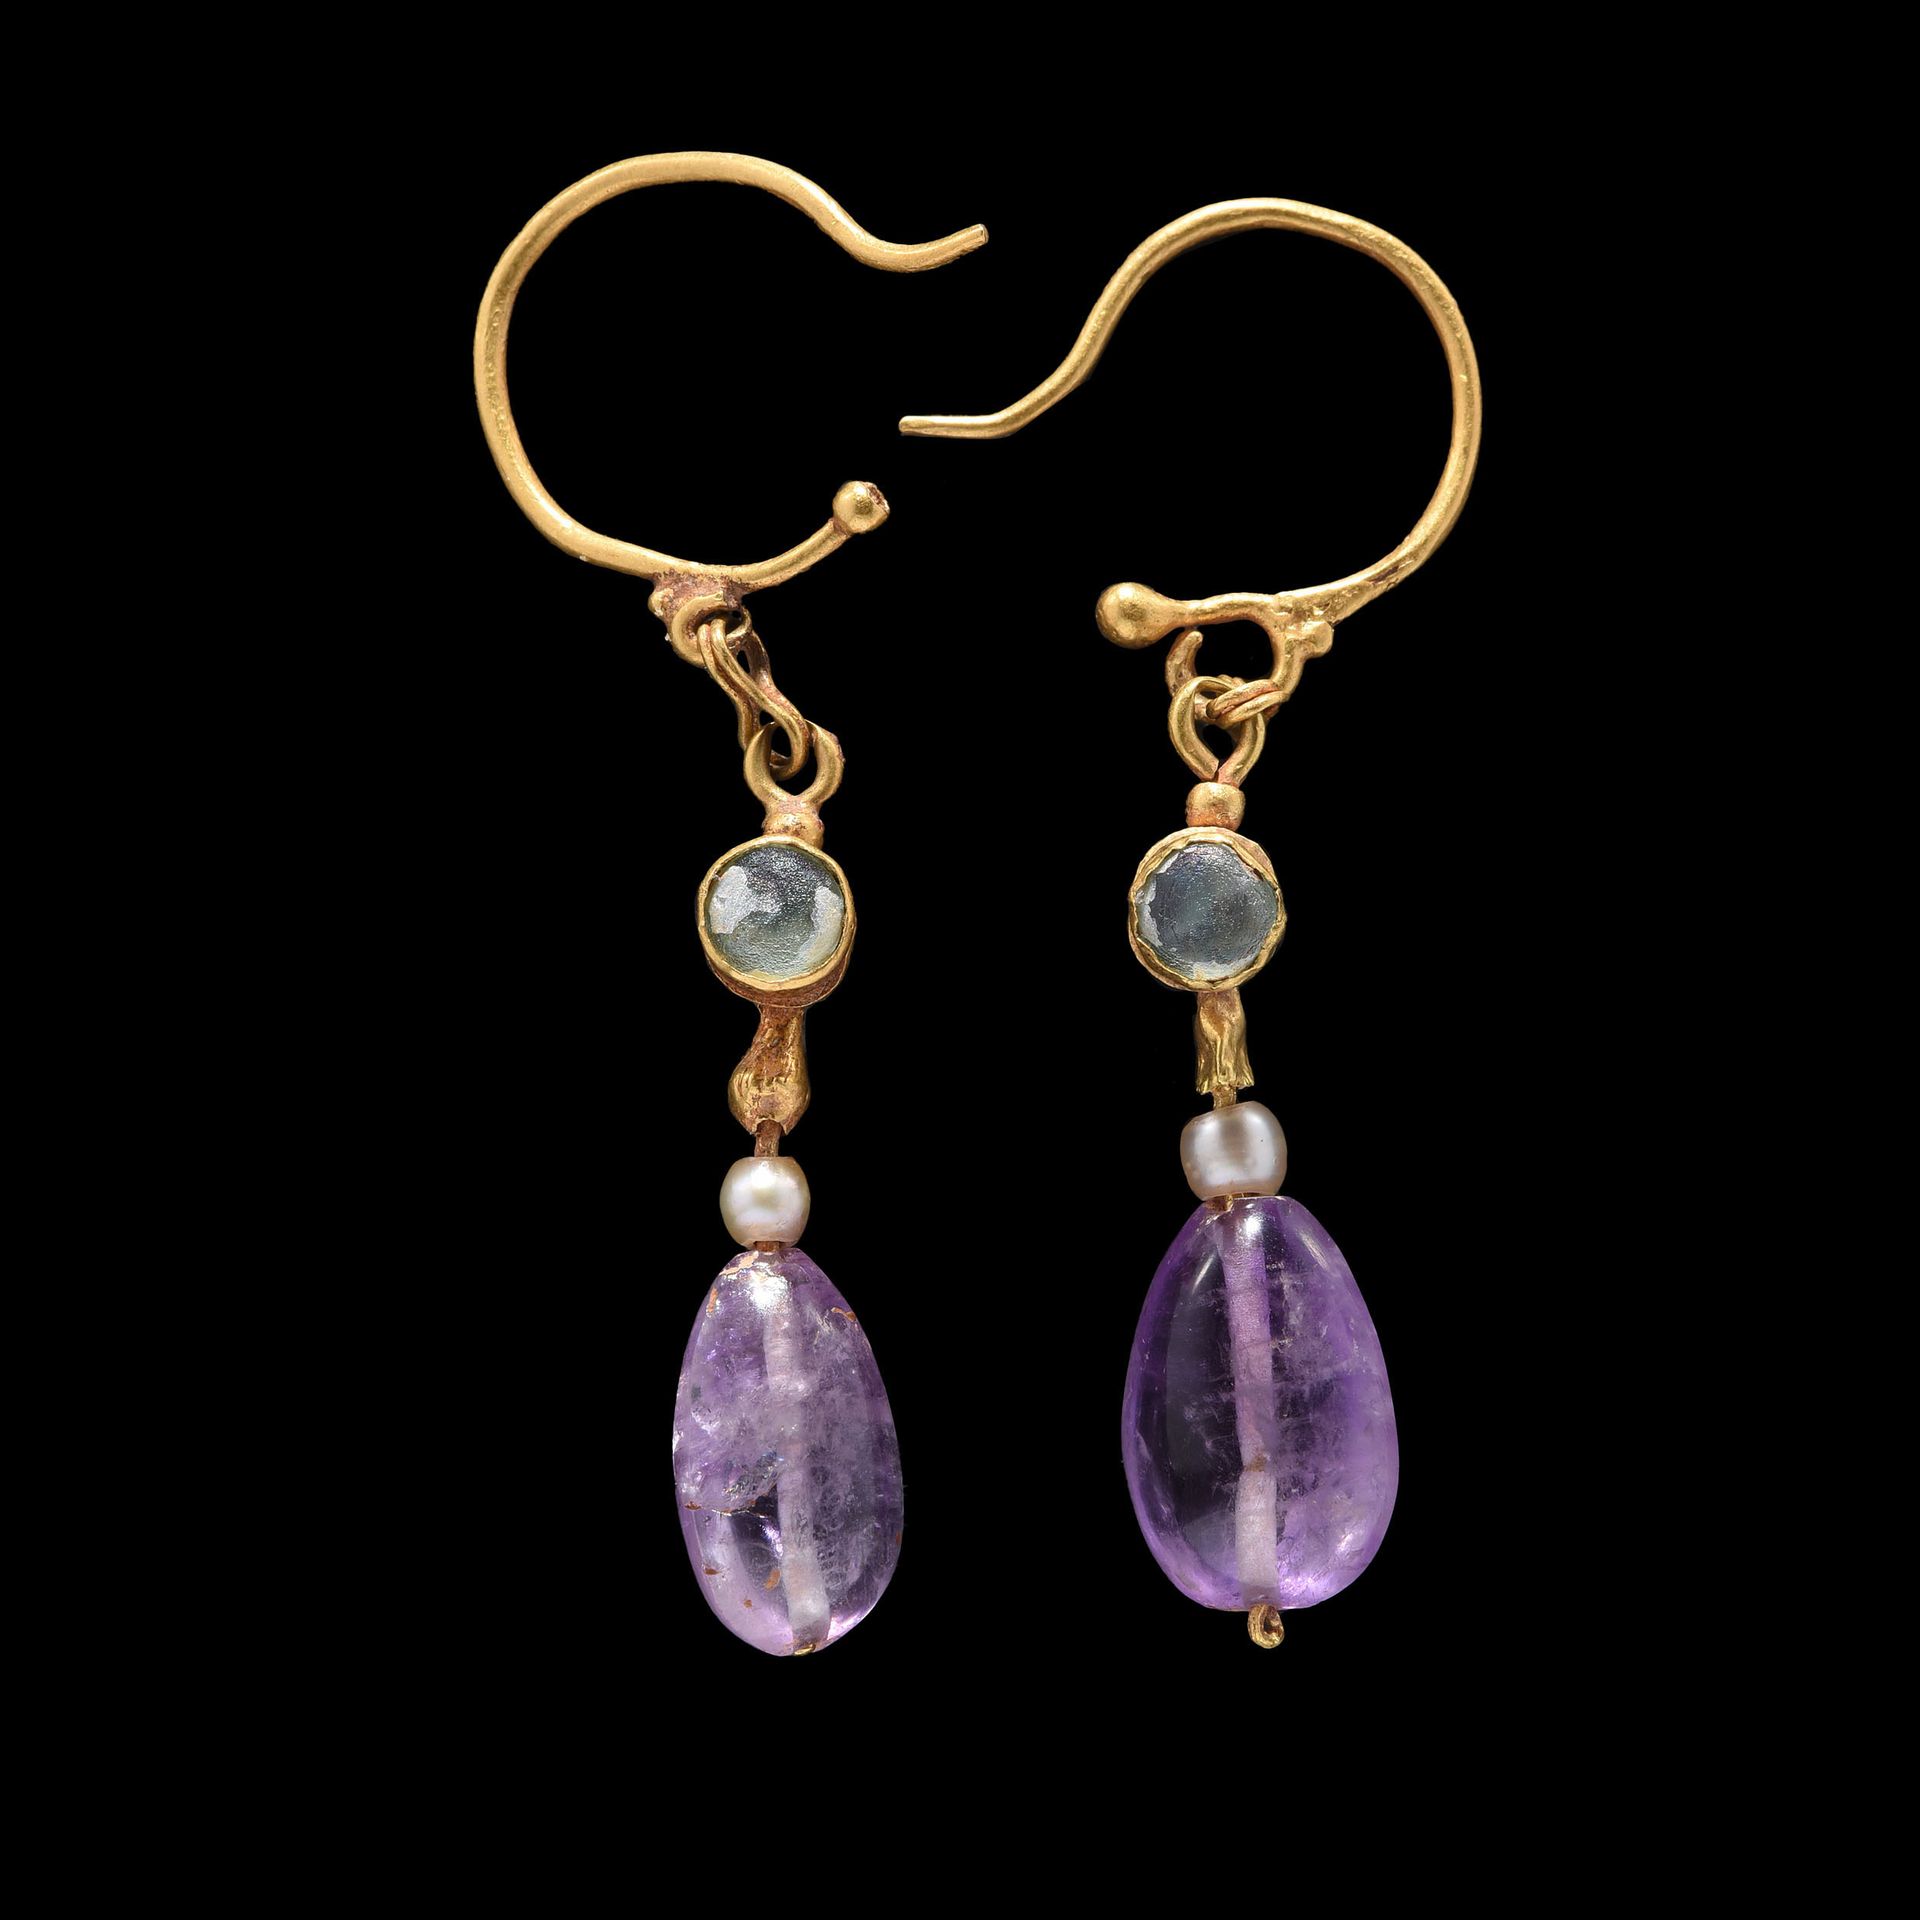 Null PAIR OF EARRINGS

Byzantine art, 6th century

Gold, pearl, iridescent glass&hellip;